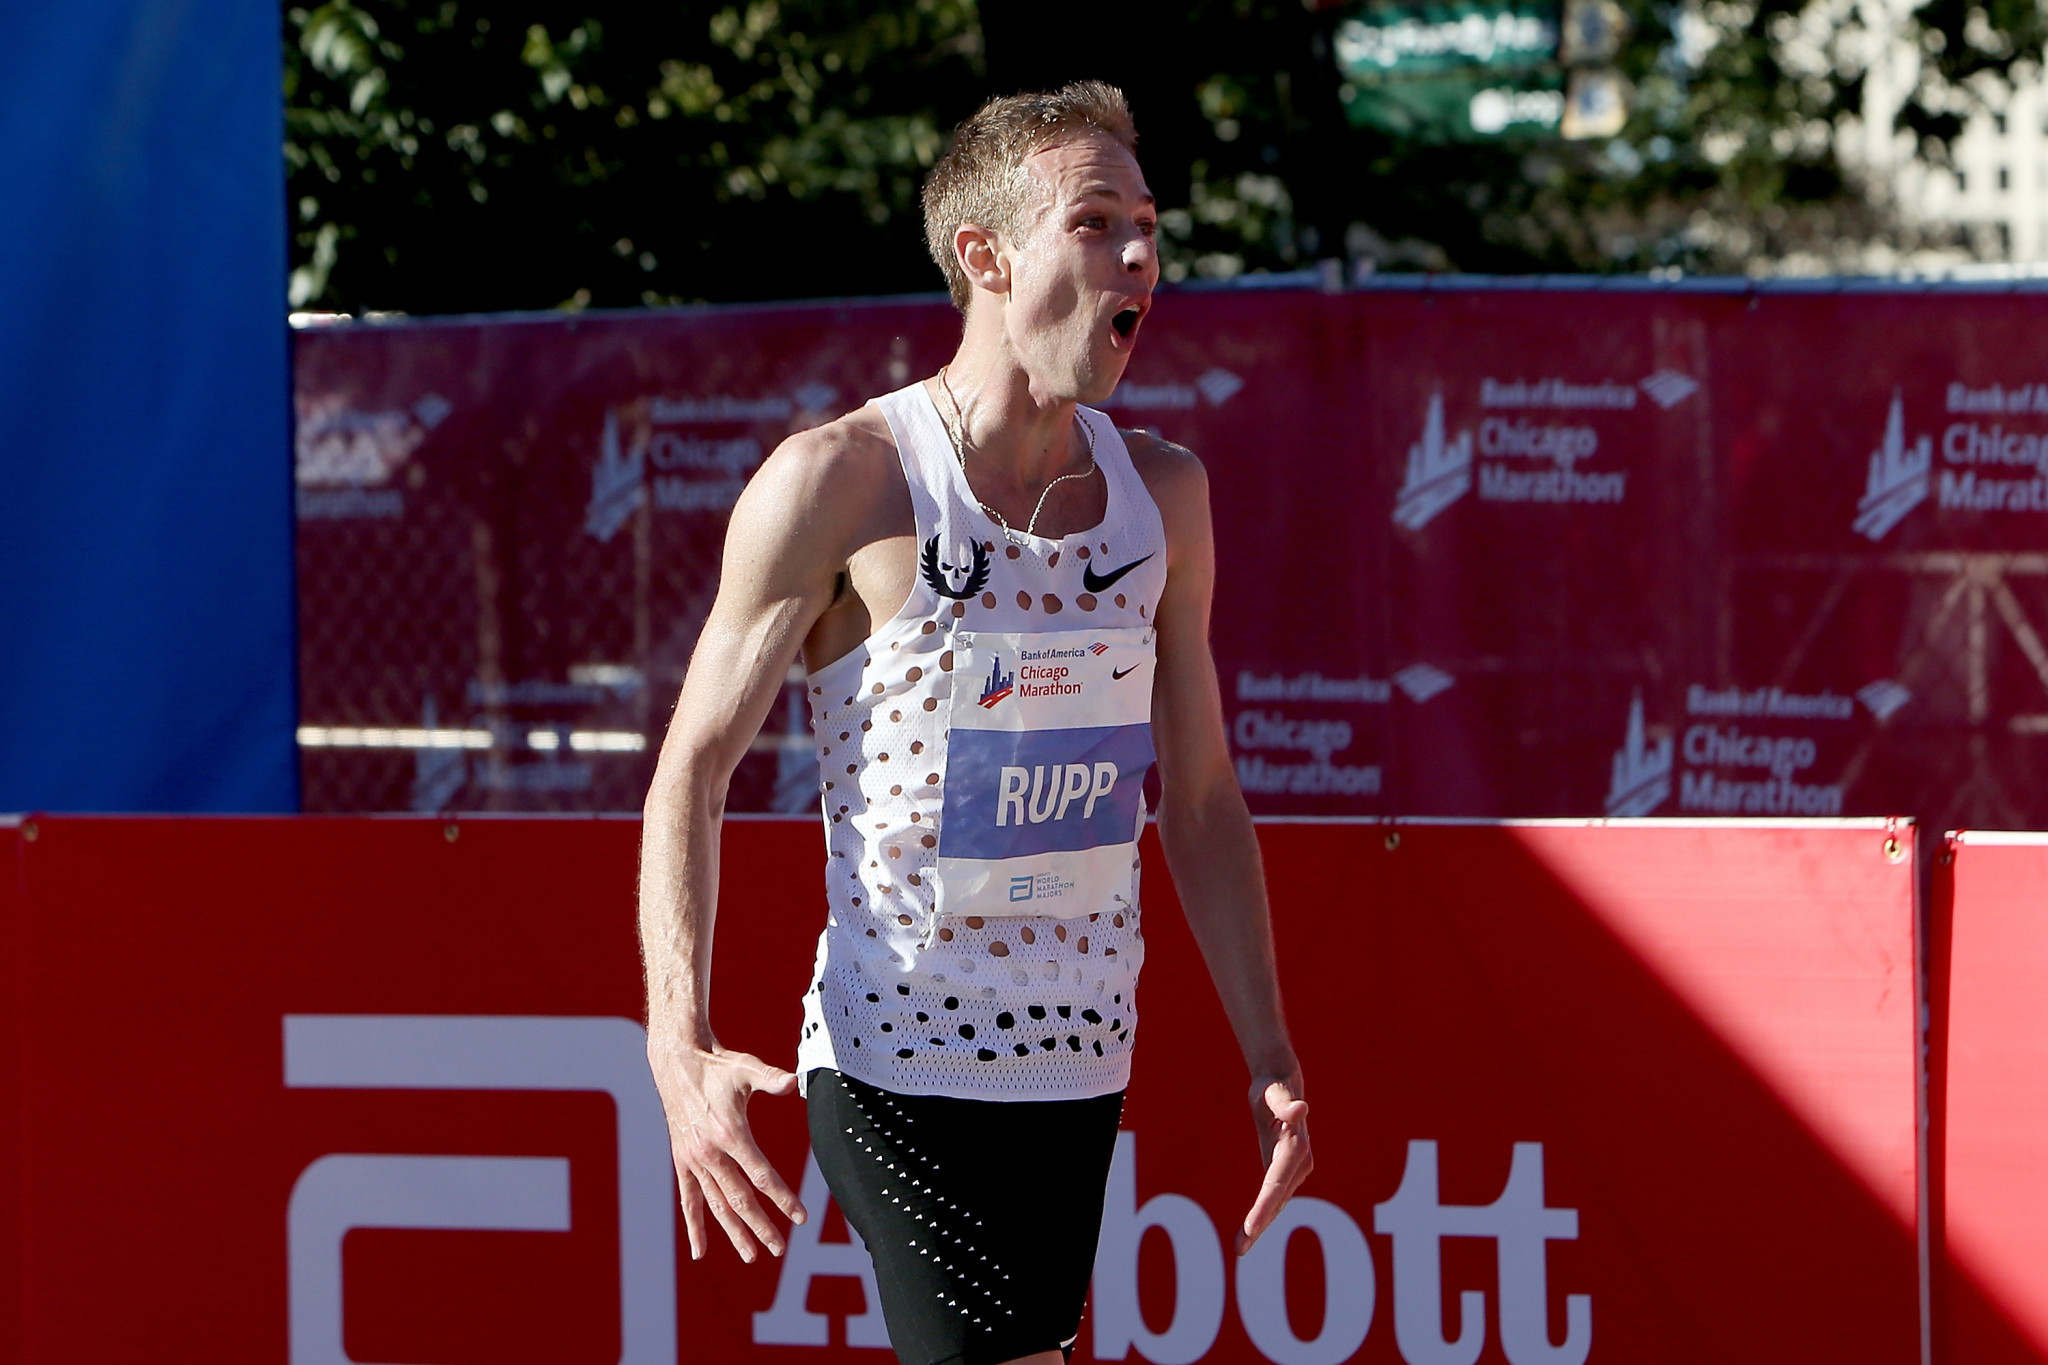 Galen Rupp enjoyed a superb victory at the Chicago Marathon ©Getty Images